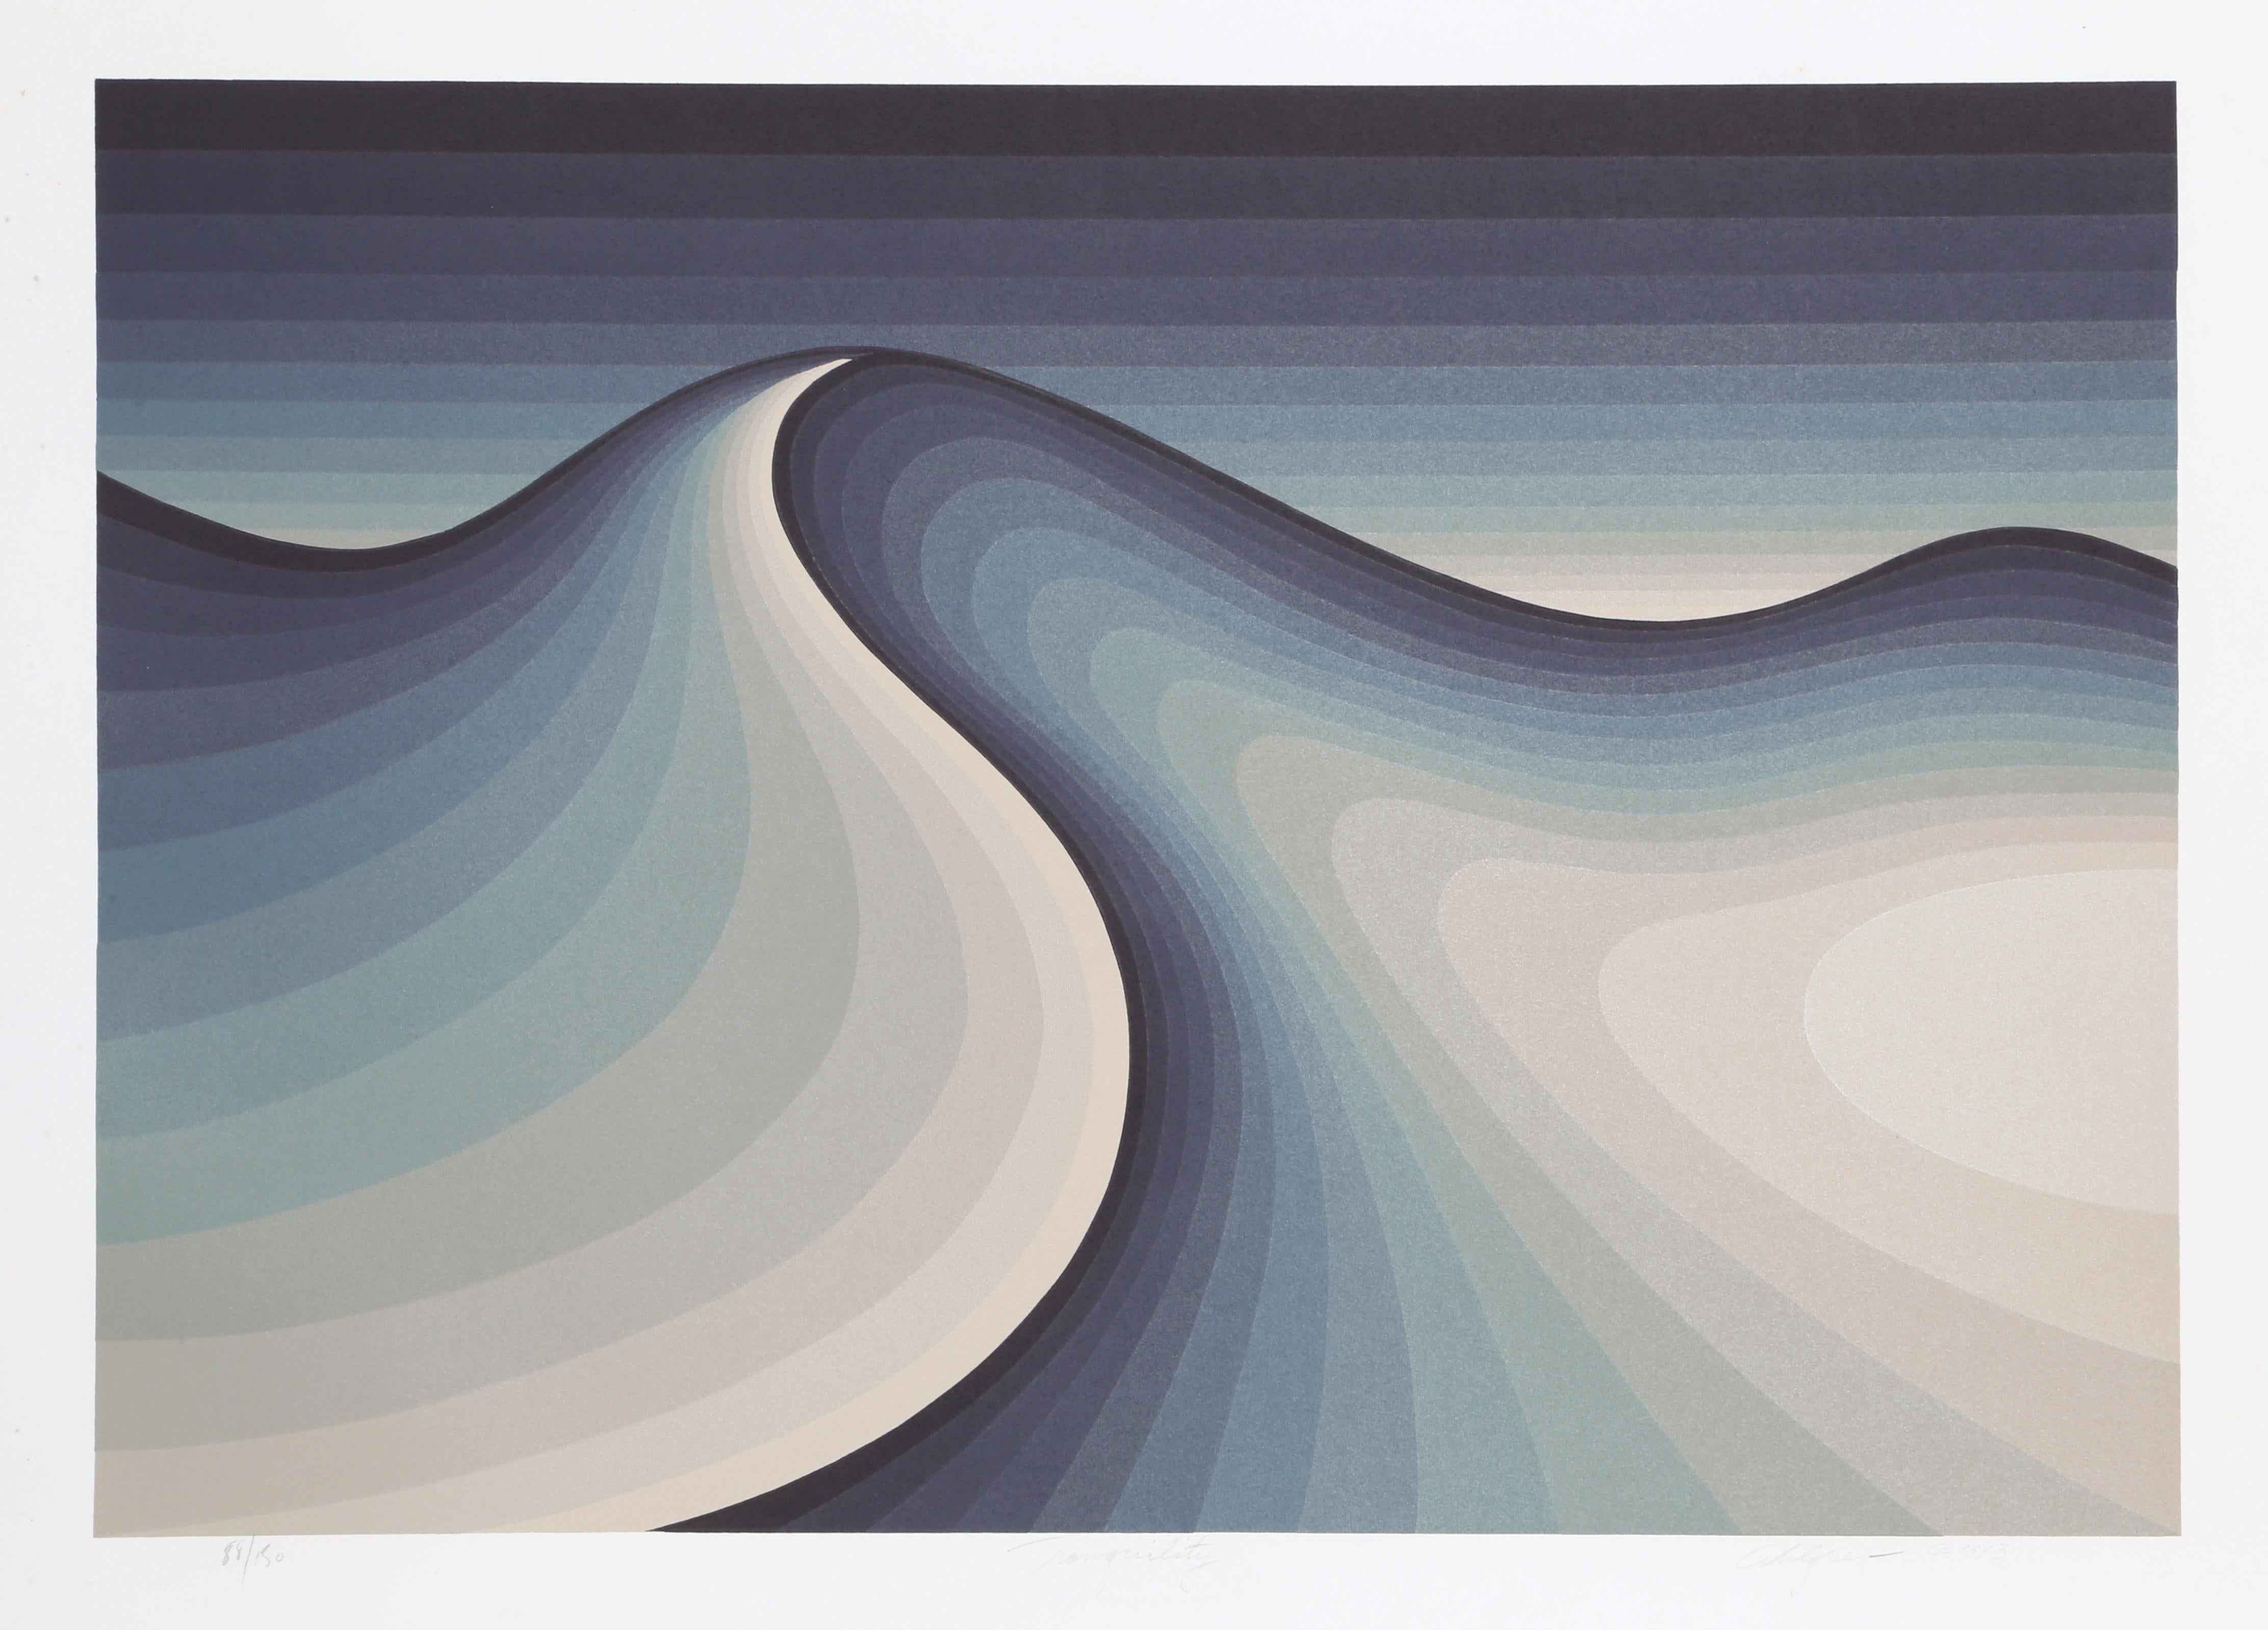 Artist: Roy Ahlgren, American (1927 - 2011)
Title: Tranquility
Year: 1983
Medium: Serigraph, signed and numbered in pencil
Edition: 150
Image Size: 18 x 25.5 inches
Size: 22 x 29.5 in. (55.88 x 74.93 cm)